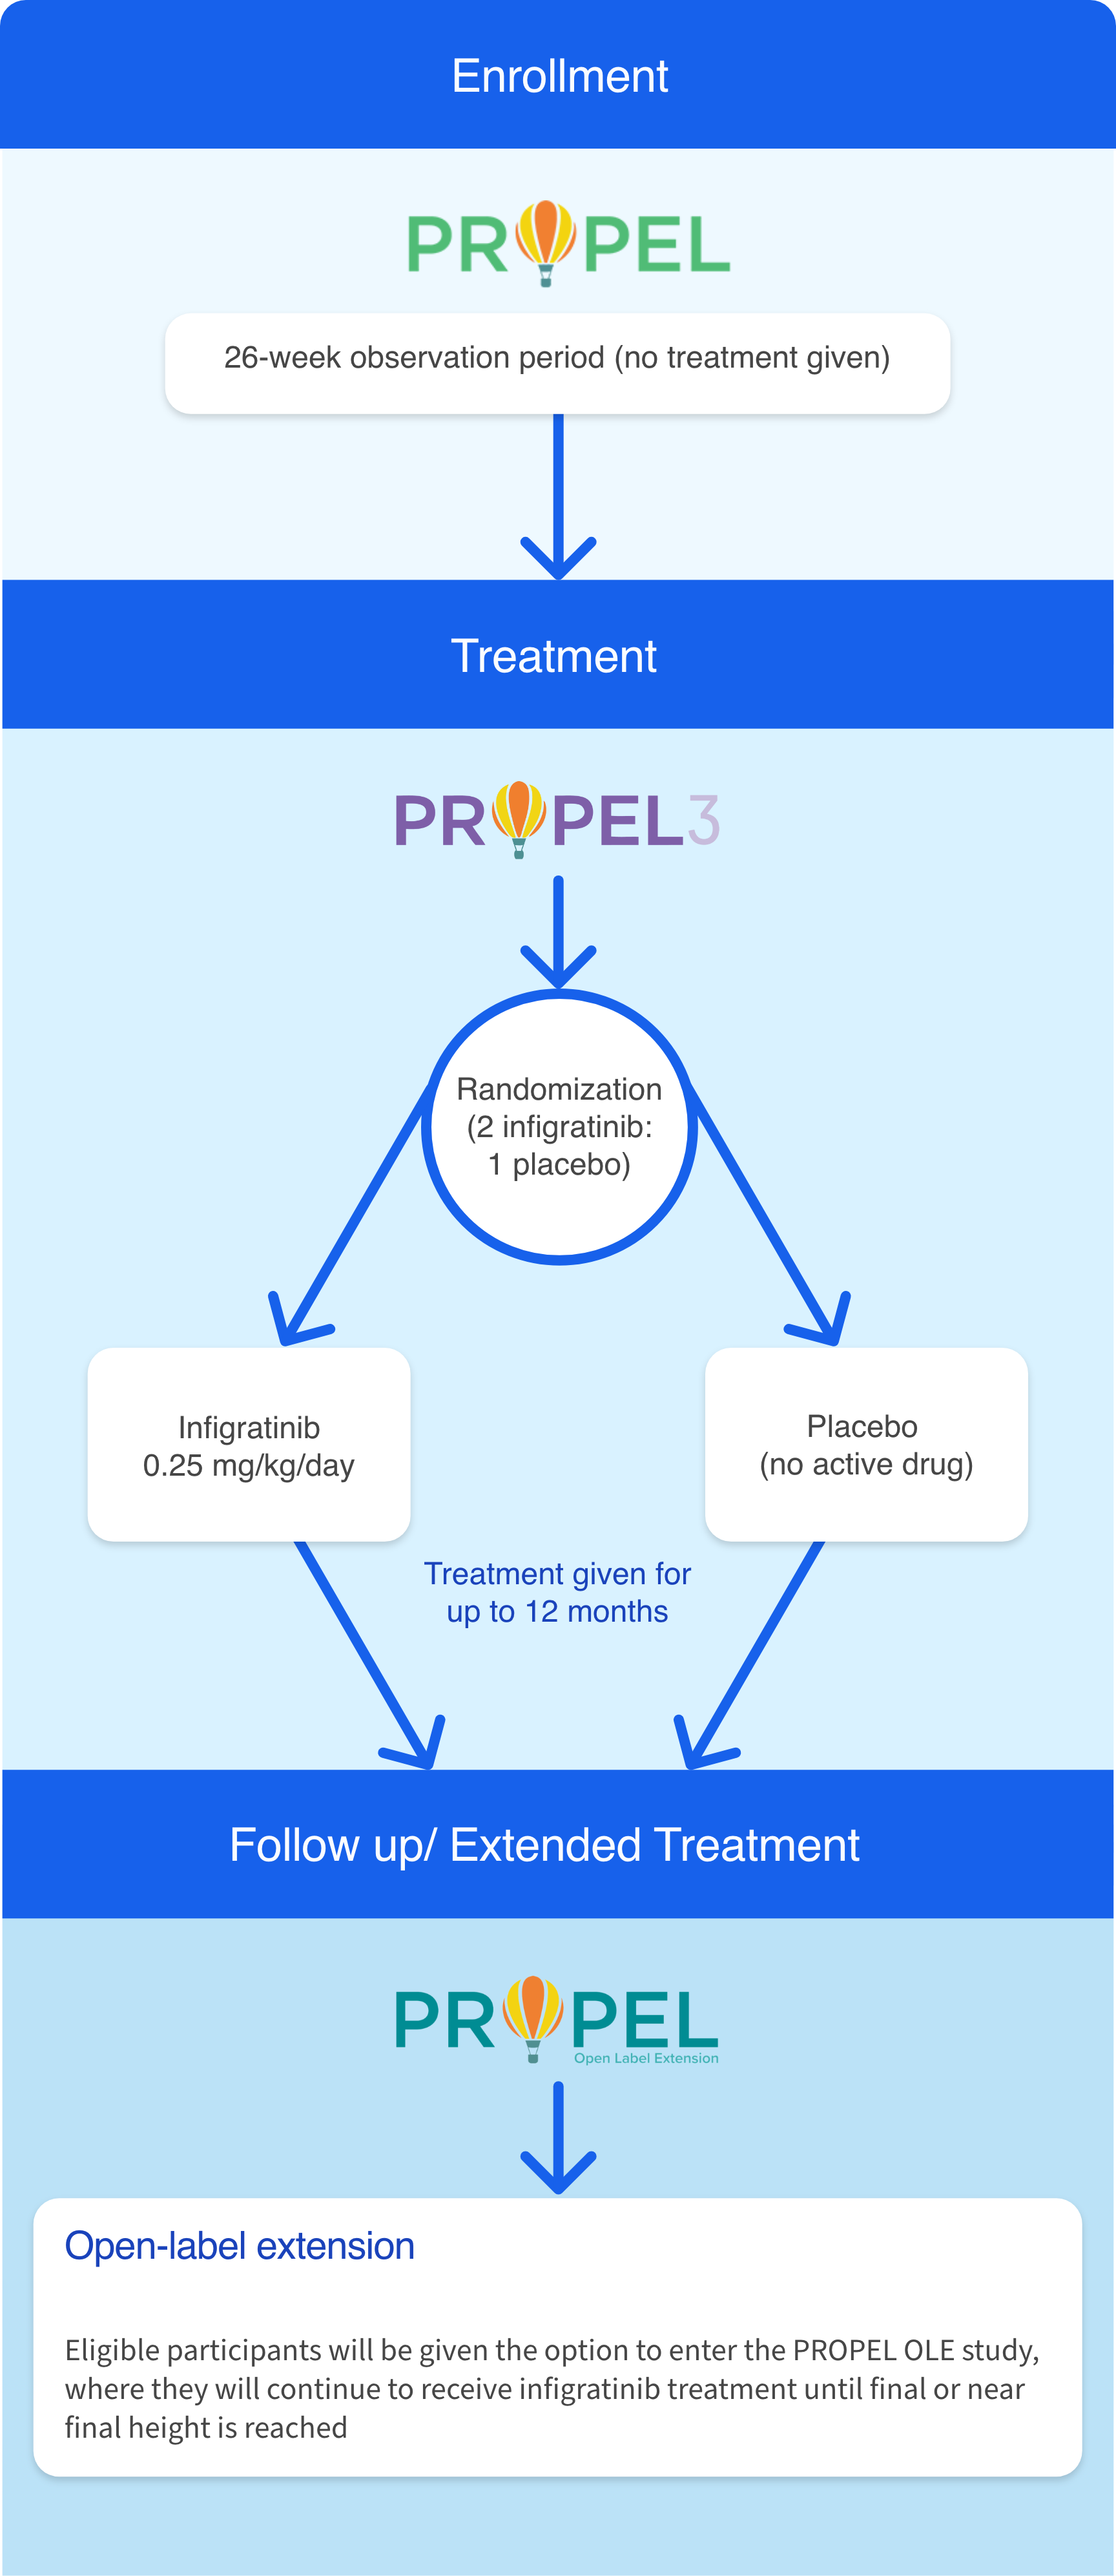 Flowchart infographic detailing the stages of the PROPEL clinical study. The first stage is 'Observation' with a 26-week period where no treatment is given. This leads to the 'Treatment' phase, labeled 'PROPEL 3,' where participants are randomized to receive either Infigratinib at a dose of 0.25 mg/kg/day or a placebo, with treatment lasting up to 12 months. The final stage is 'Extended treatment' under the 'PROPEL Open Label Extension,' where eligible participants have the option to continue receiving Infigratinib until their final or near final height is reached.